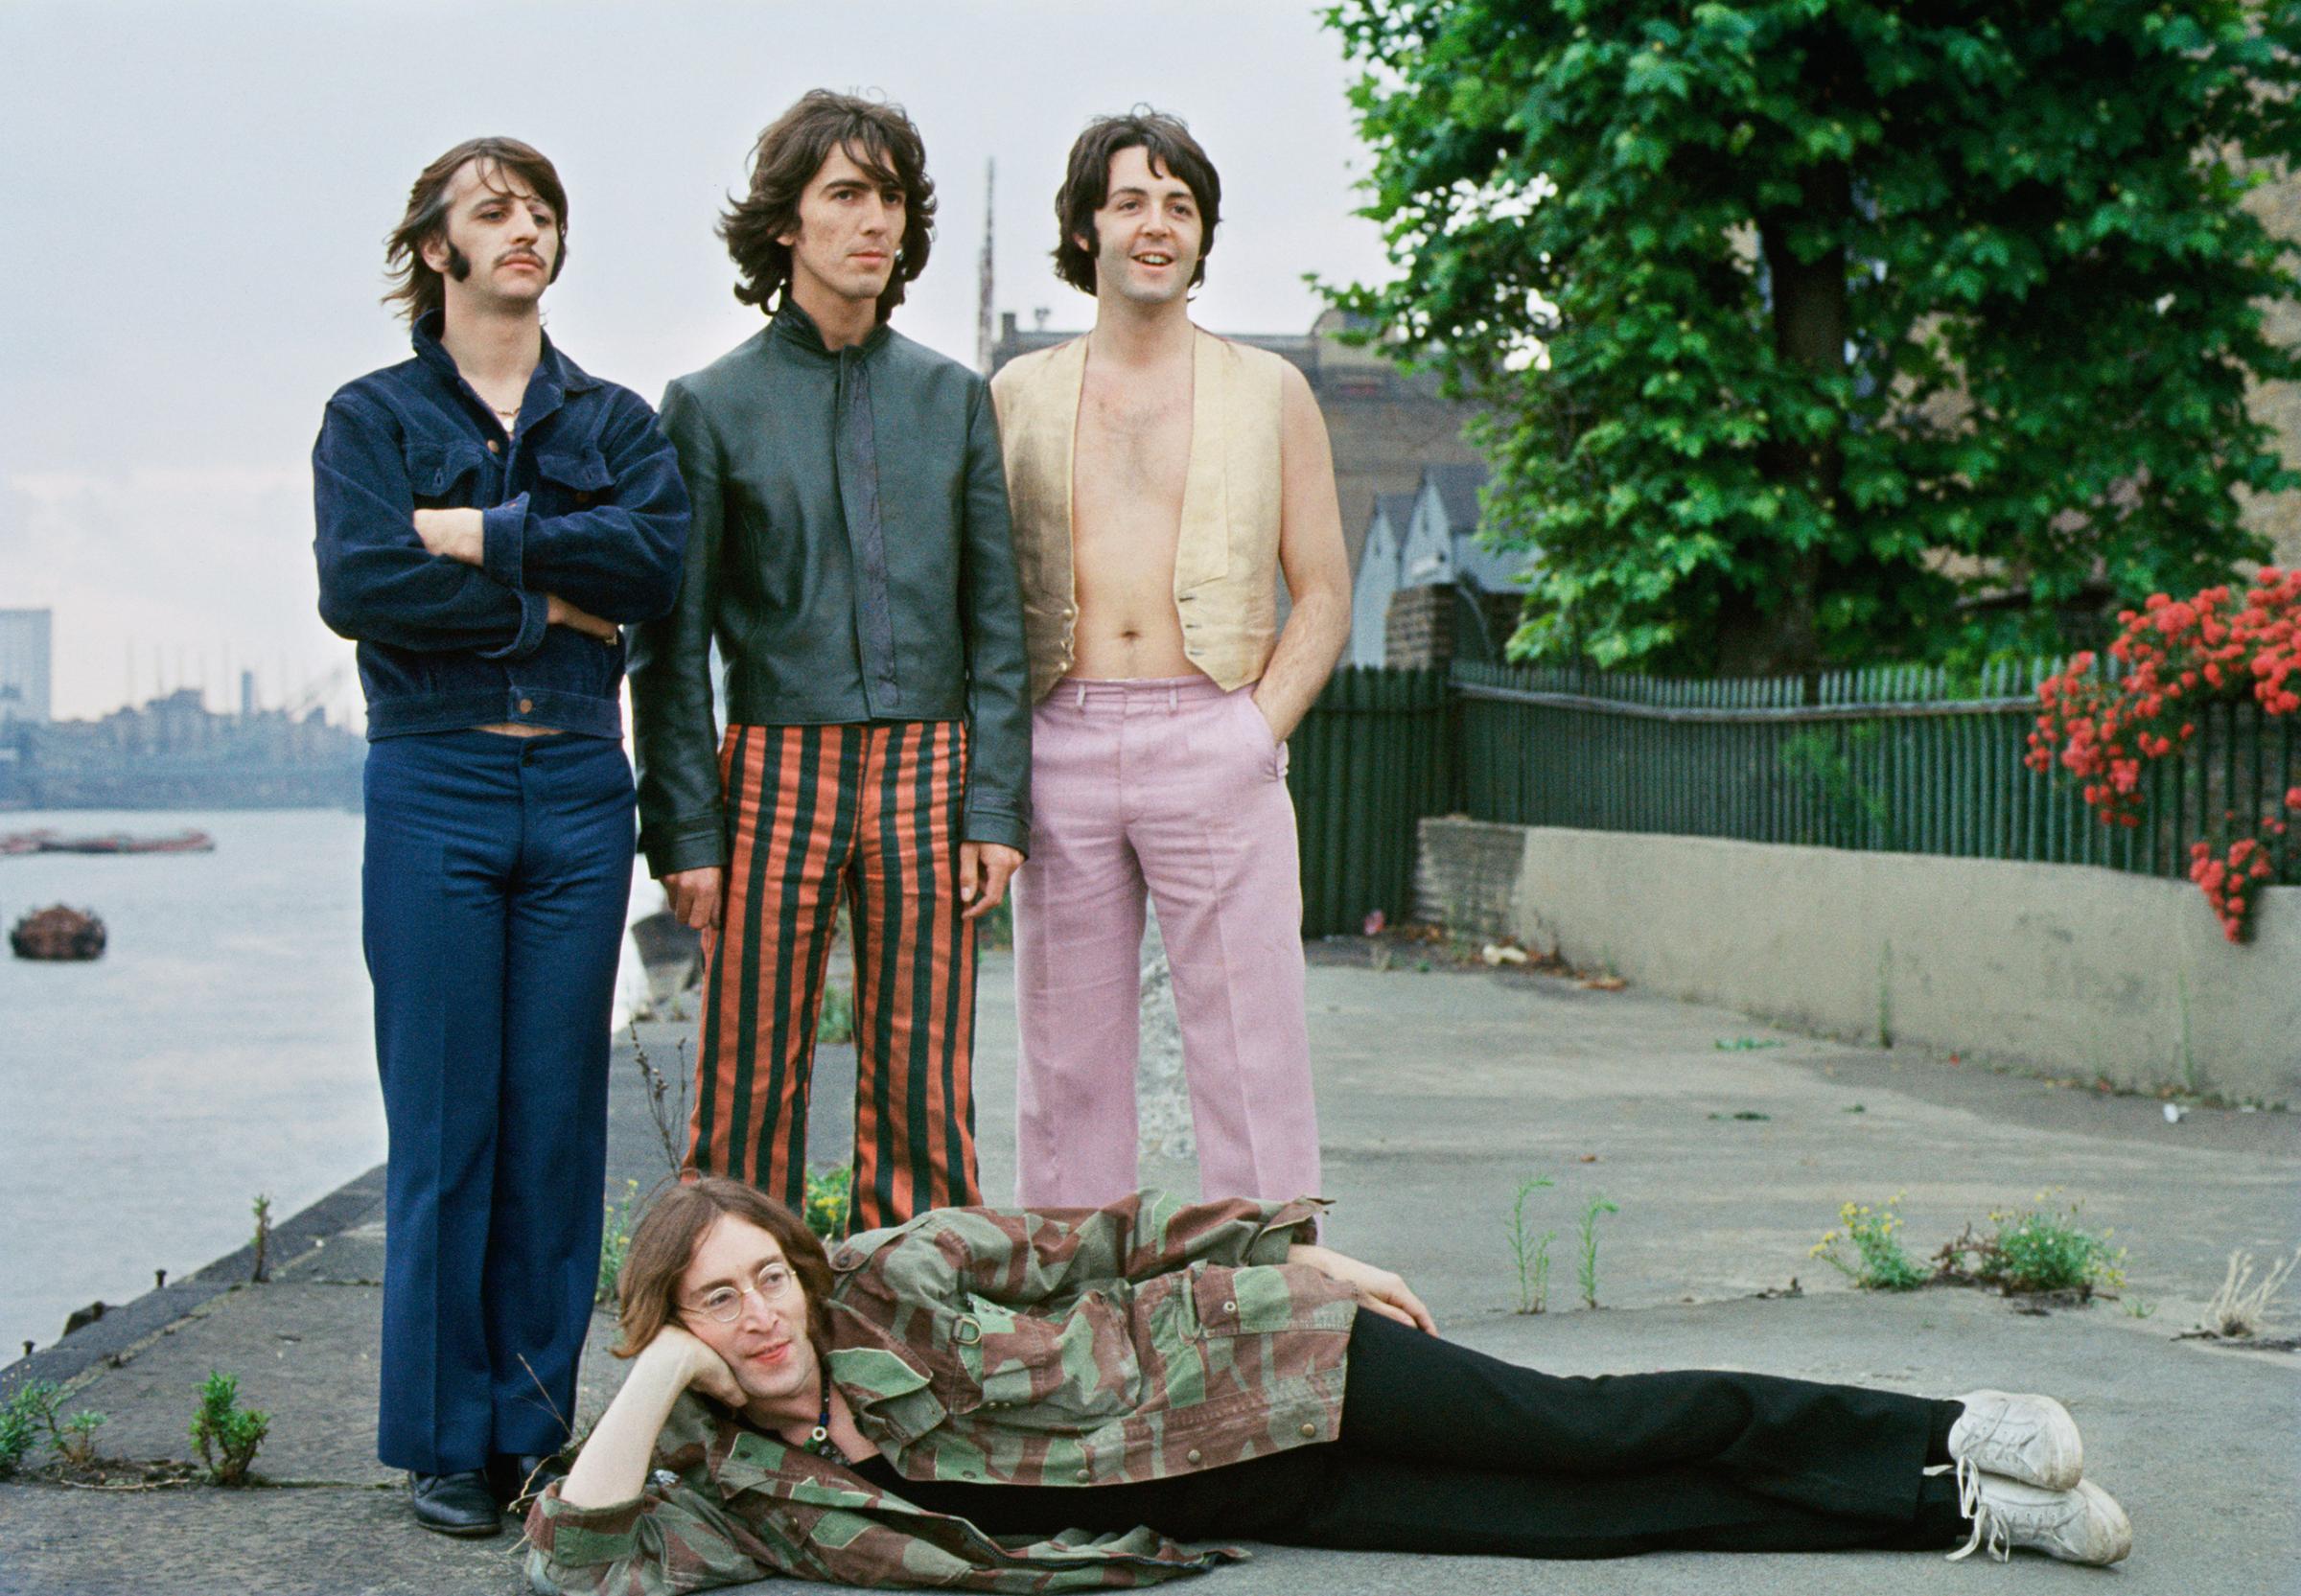 The Beatles Mad Day Out photoshoot in 1968.